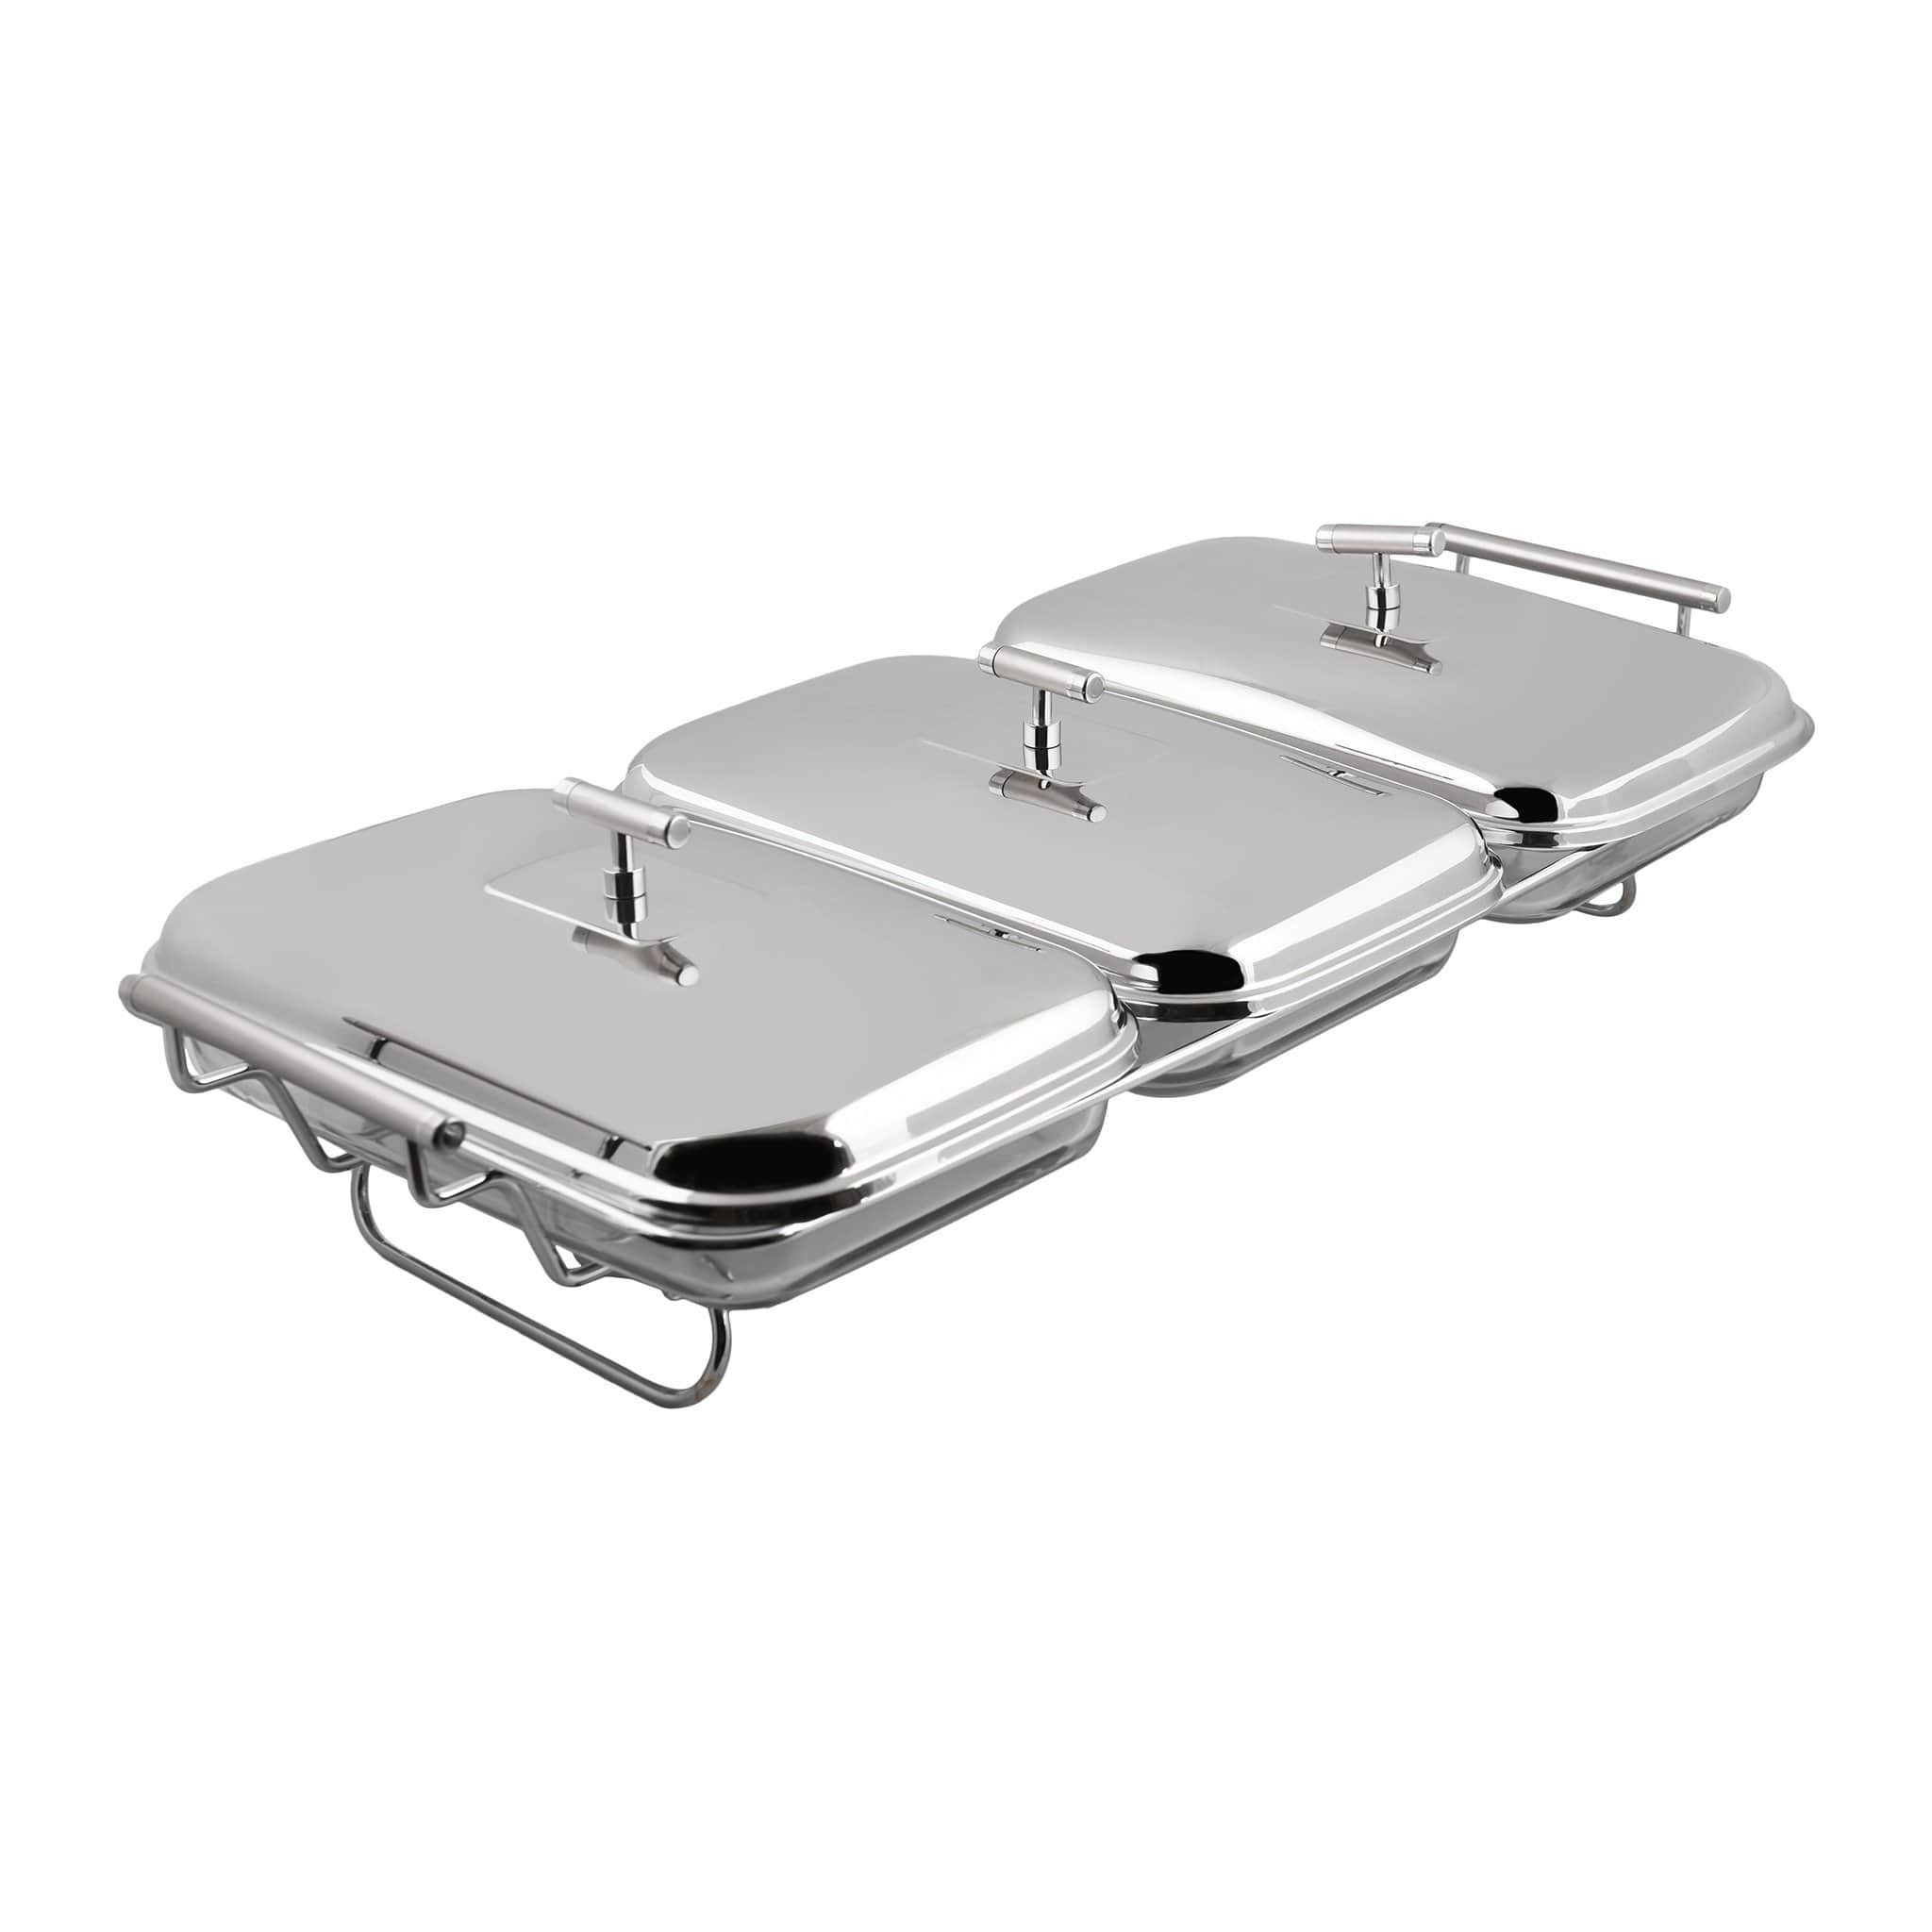 3 Rectangular Food Warmers with 3 Candles - Stainless Steel 18/10 & Tempered Glass - 3x2.0 Lit - 8000115